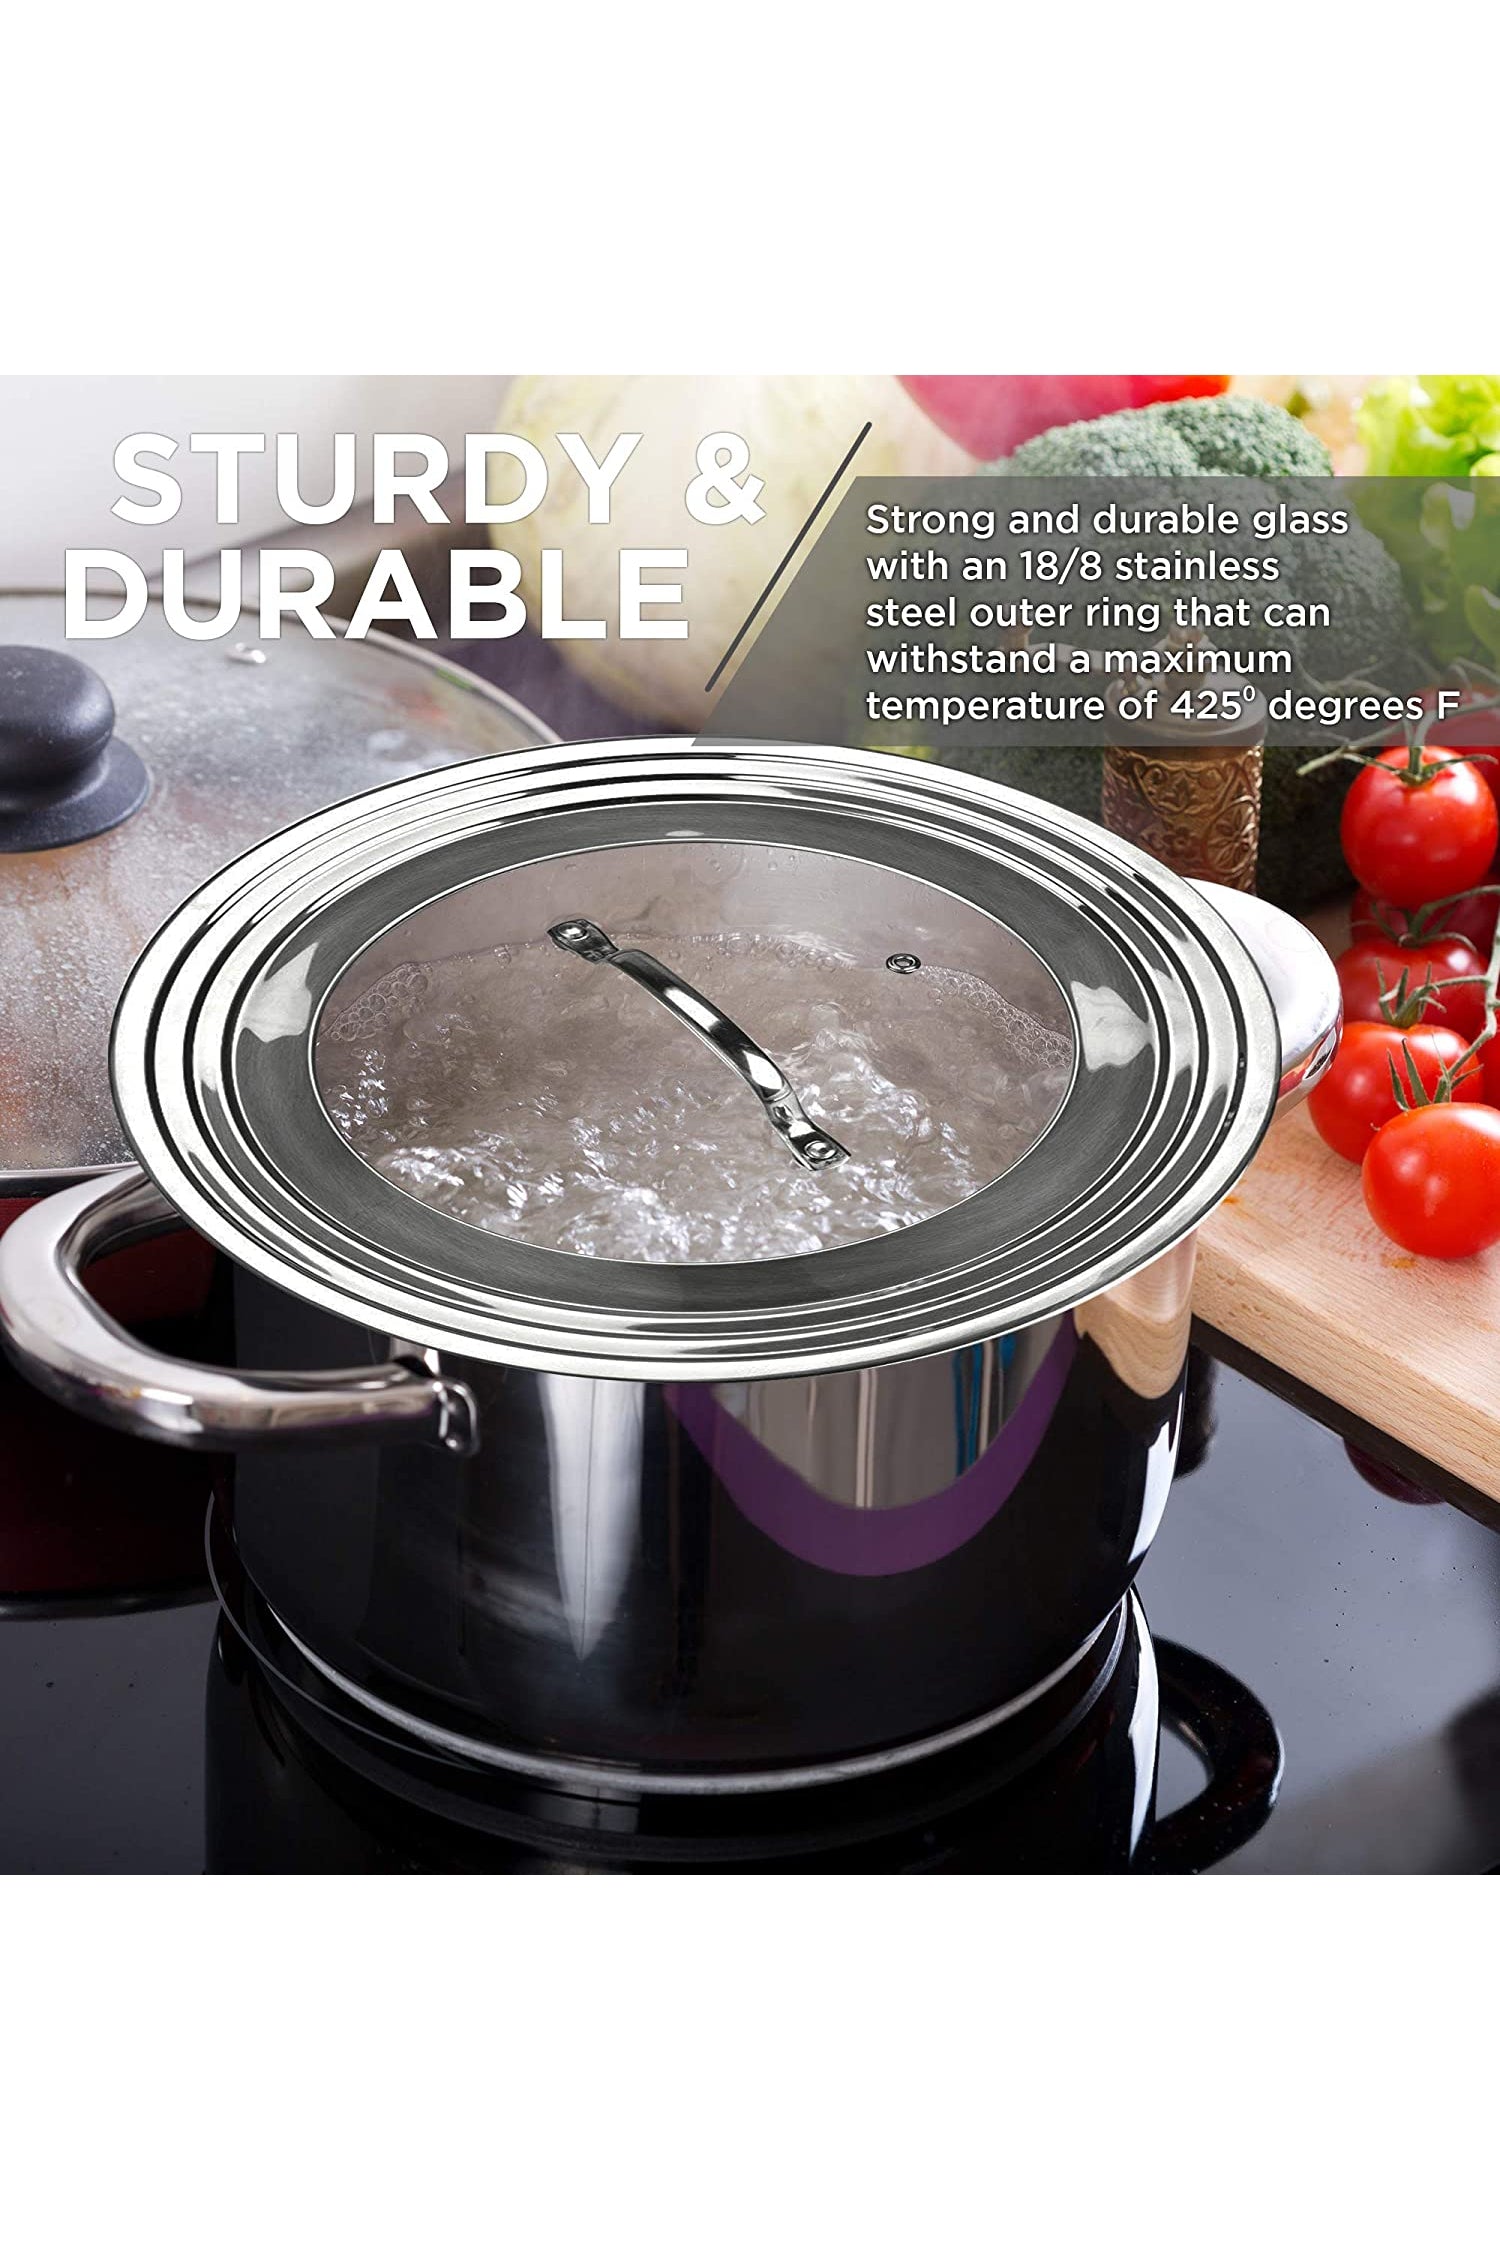 This Universal Pot and Pan Lid Makes Cooking So Much Easier